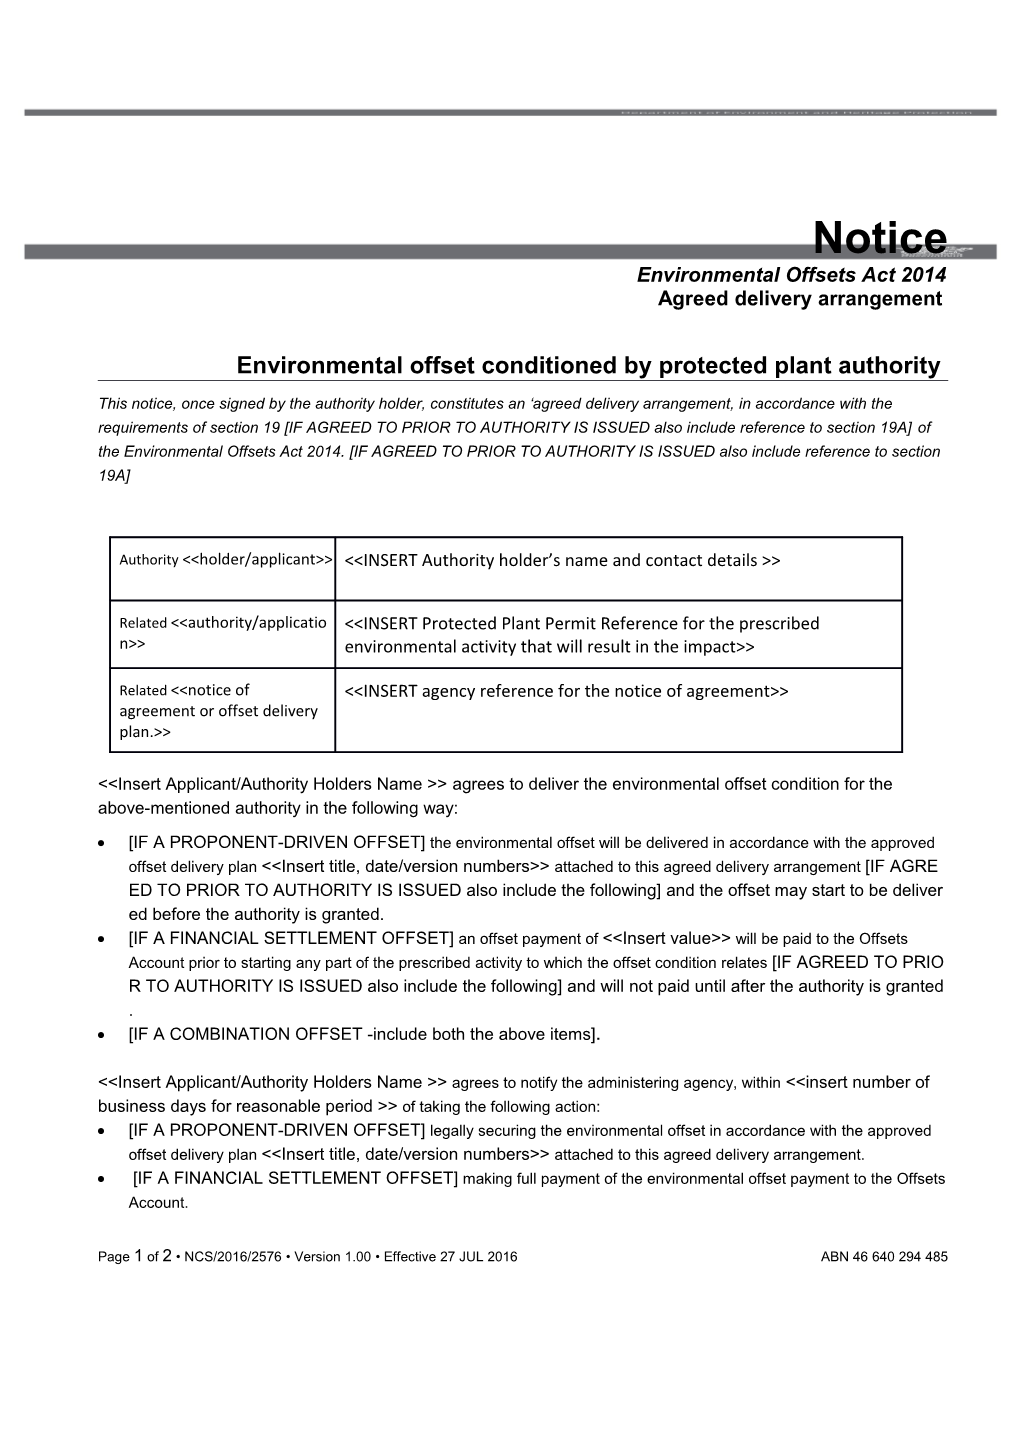 NCS/2016/2576 Notice - Environmental Offsets Agreed Delivery Arrangement